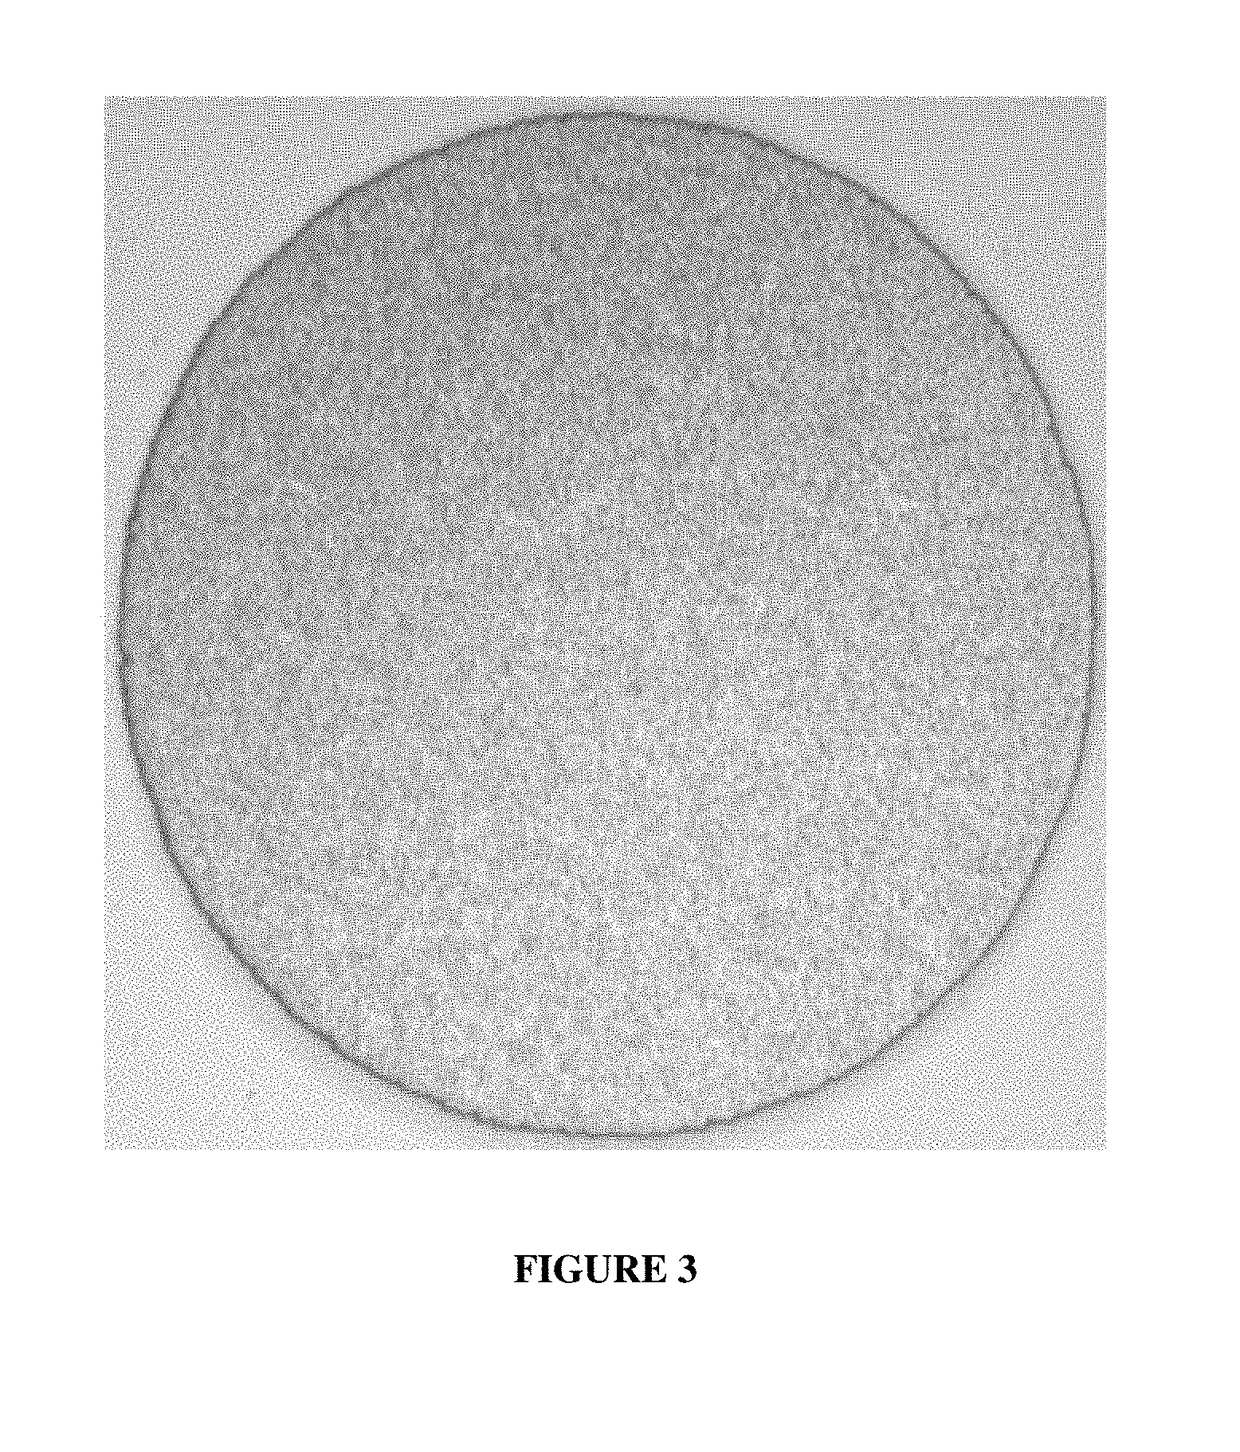 Indium electroplating compositions and methods for electroplating indium